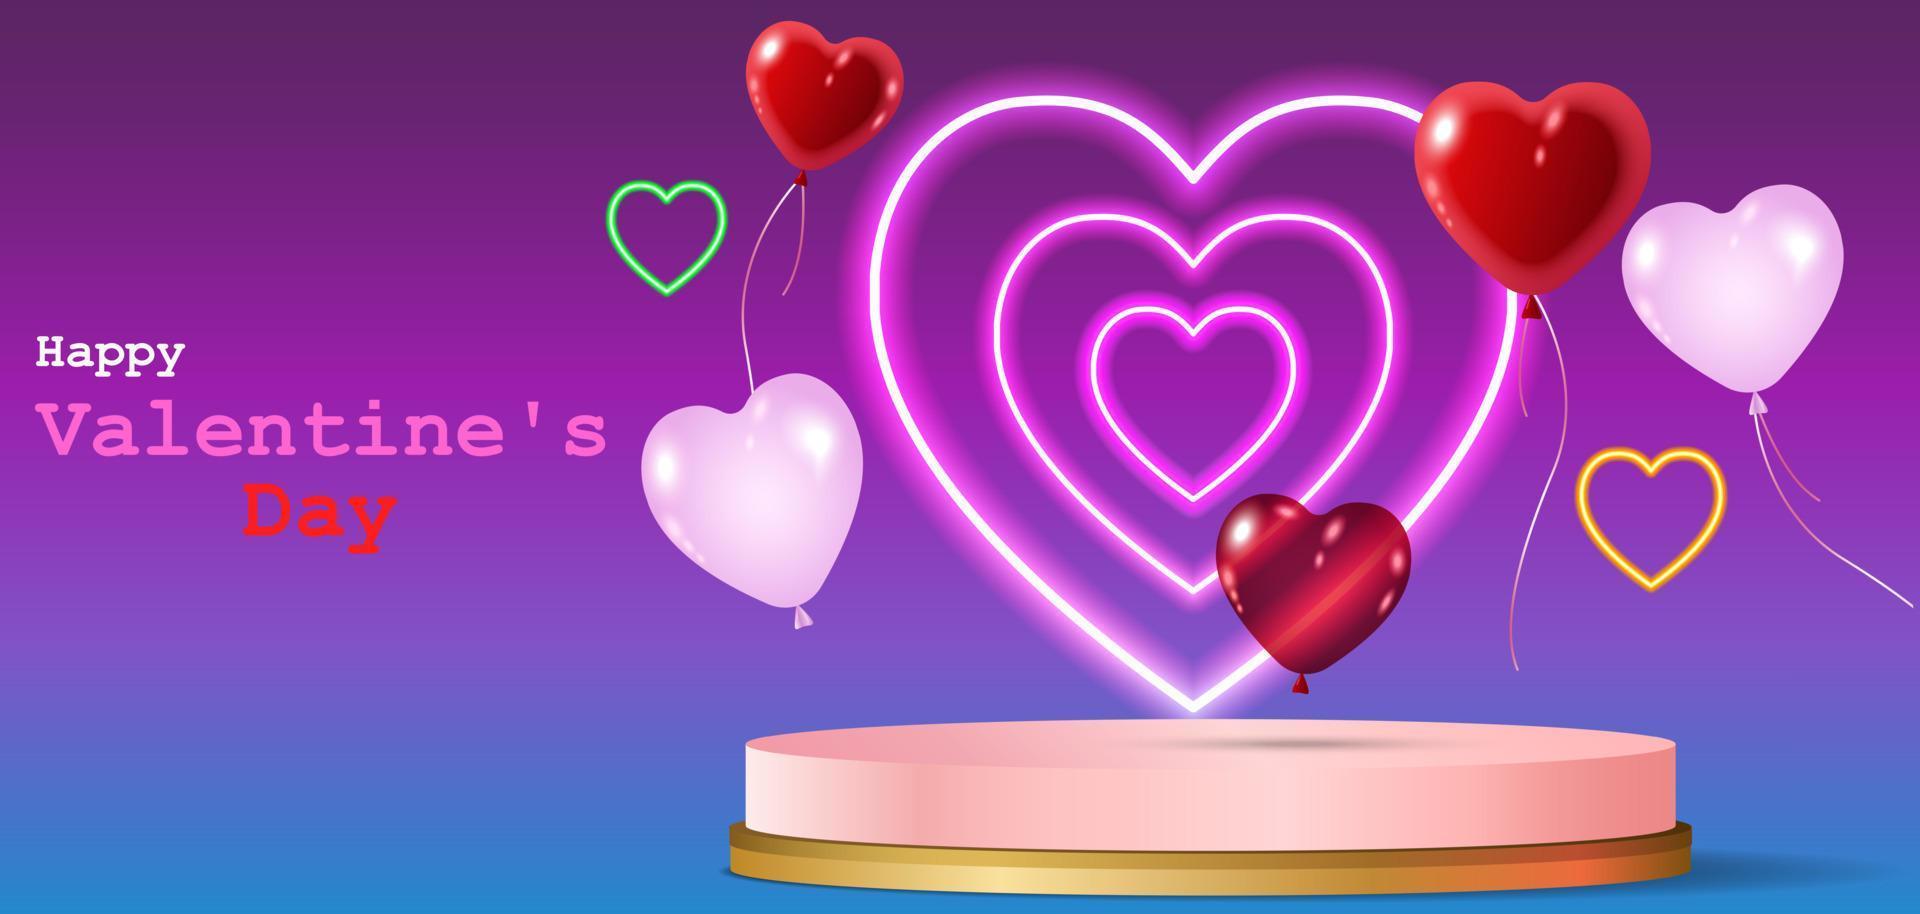 Happy Valentine's Day poster. Holiday background with red and pink balloons, neon heart, round stage, and pink podium. vector